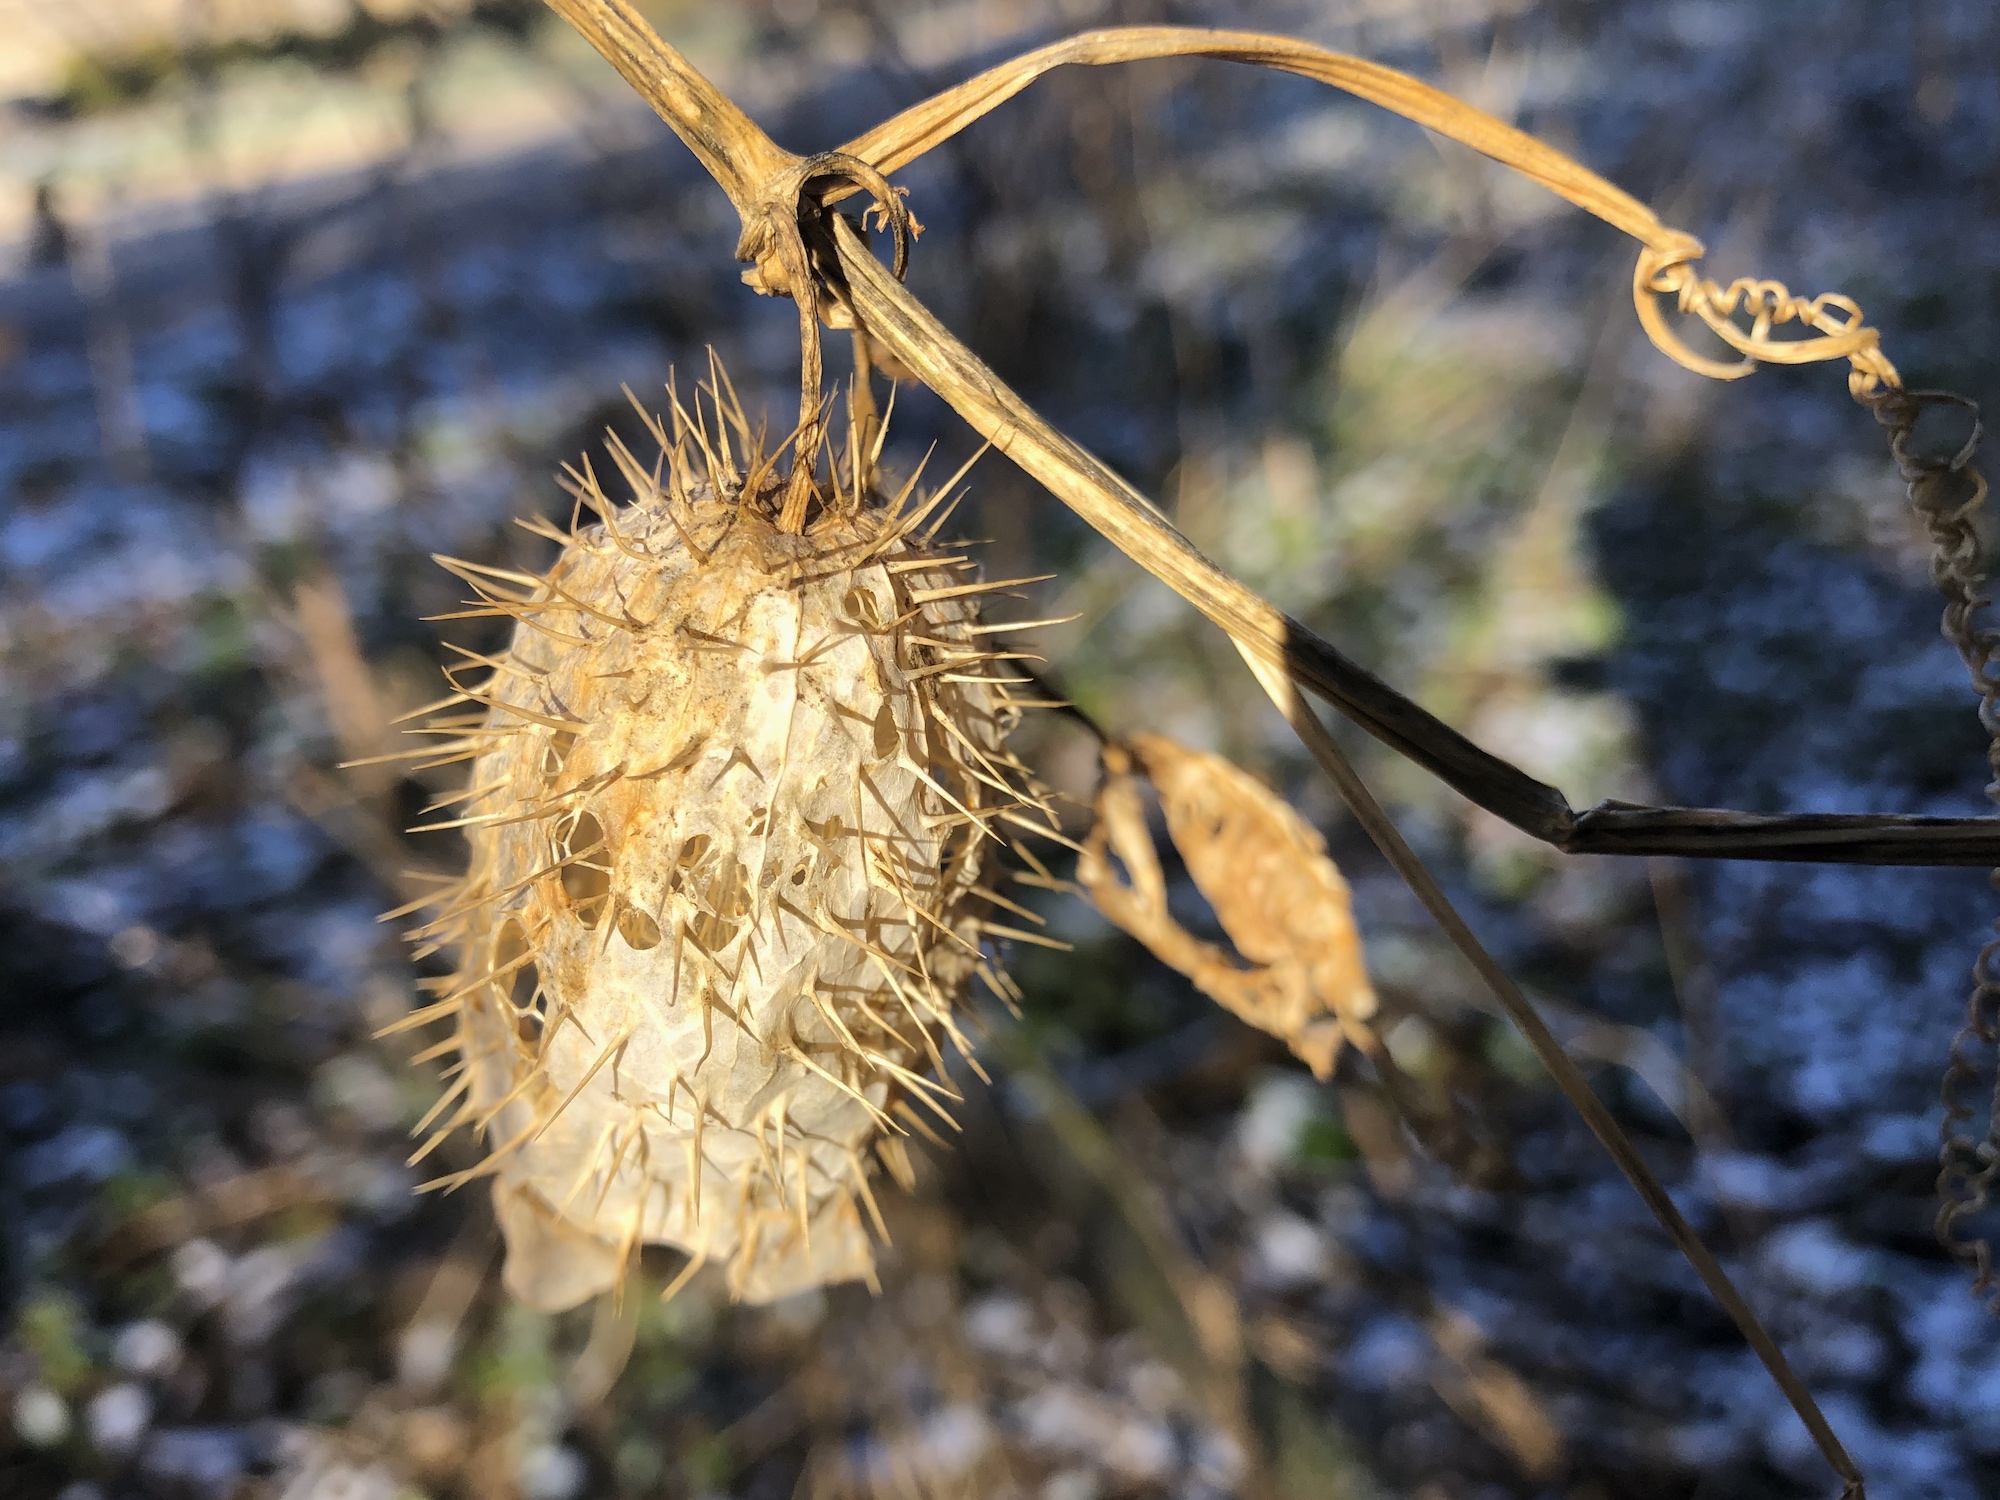 Wild Cucumber at edge of woods on Arbor Drive in Madison, Wisconsin on December 2, 2019.